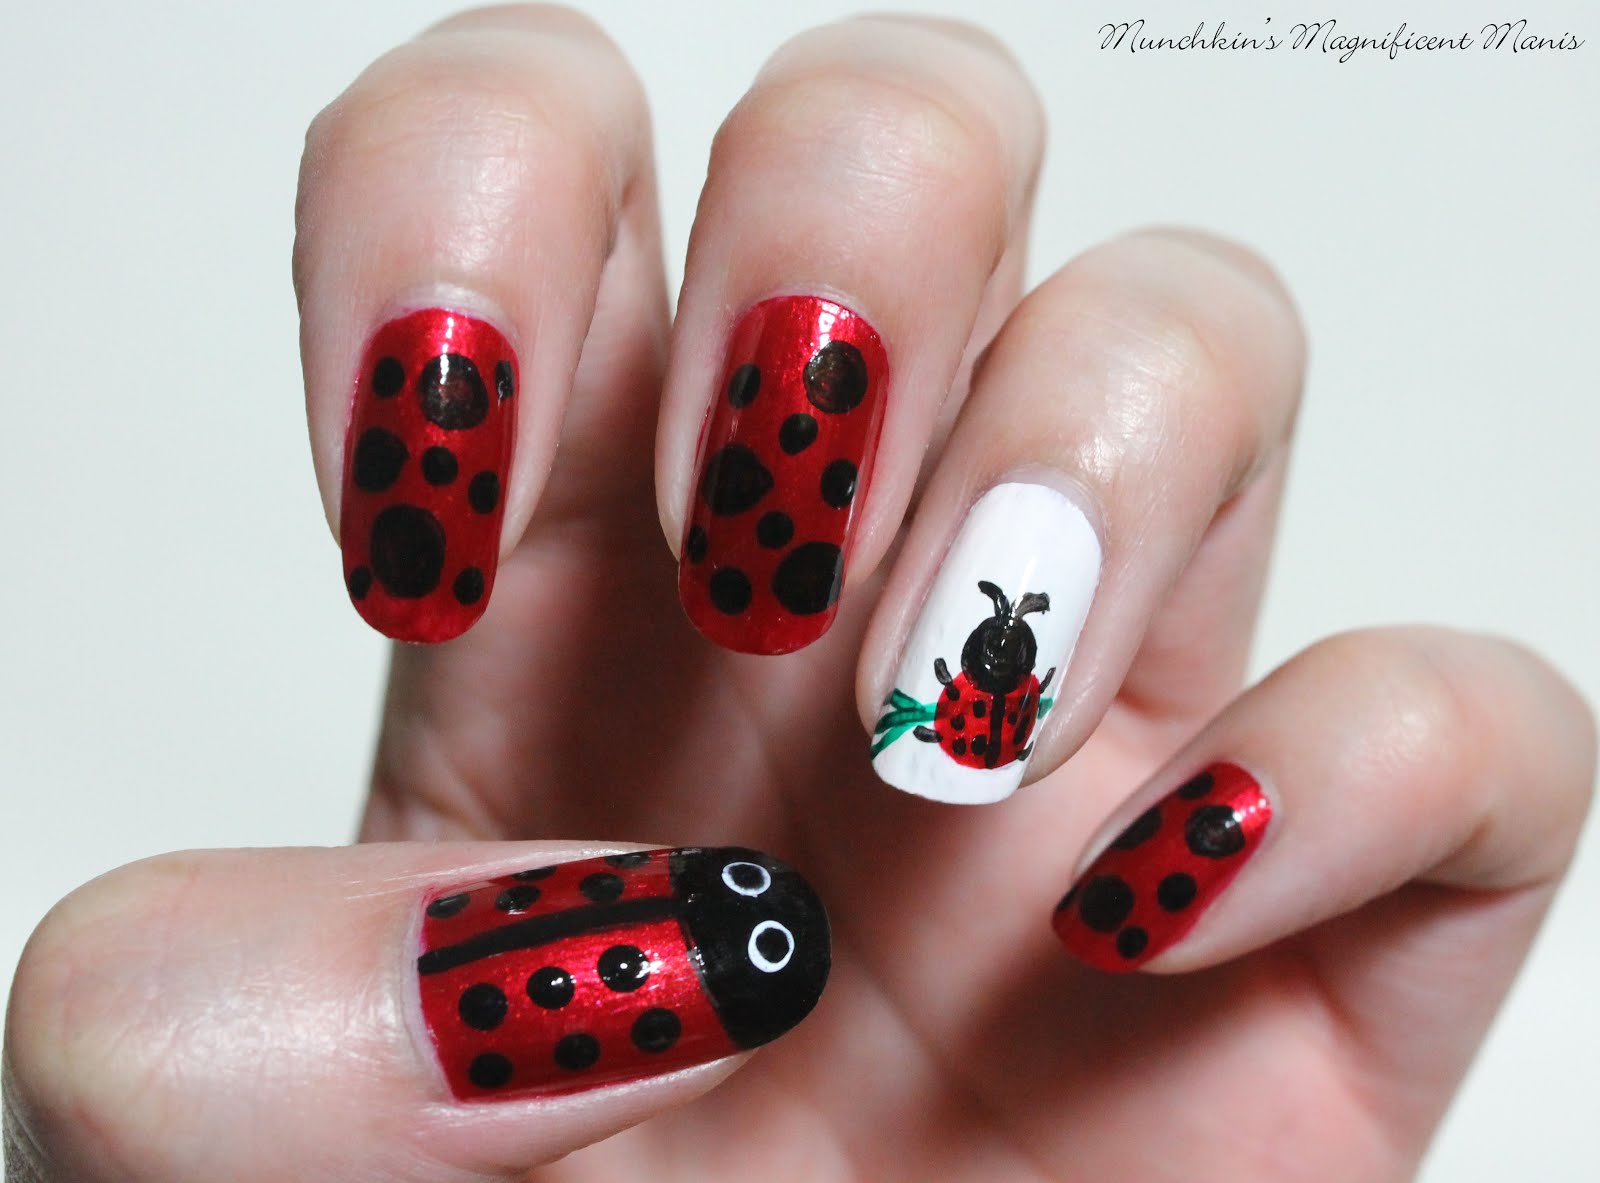 4. Best Nail Designs in Parksville: Ladybug Inspired - wide 5